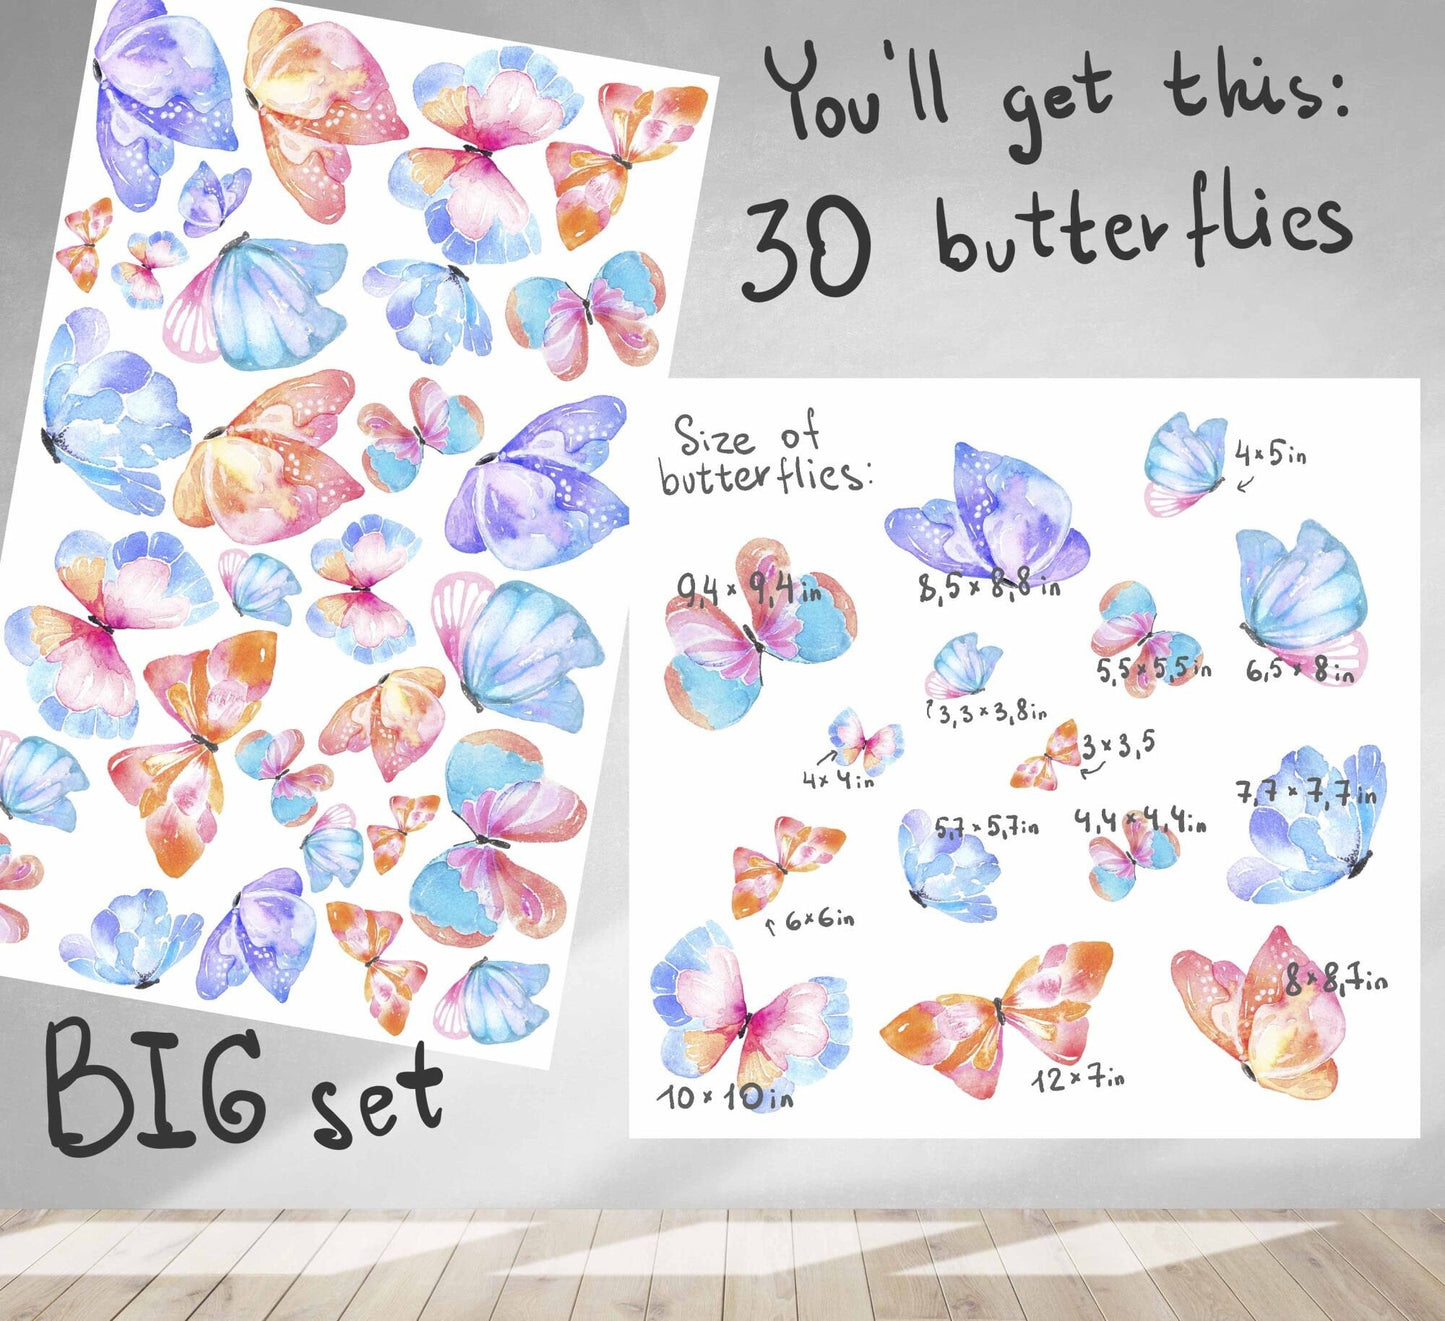 Butterfly Wall Decal Stickers Watercolor Nursery girls pink violet baby bedroom, LF015